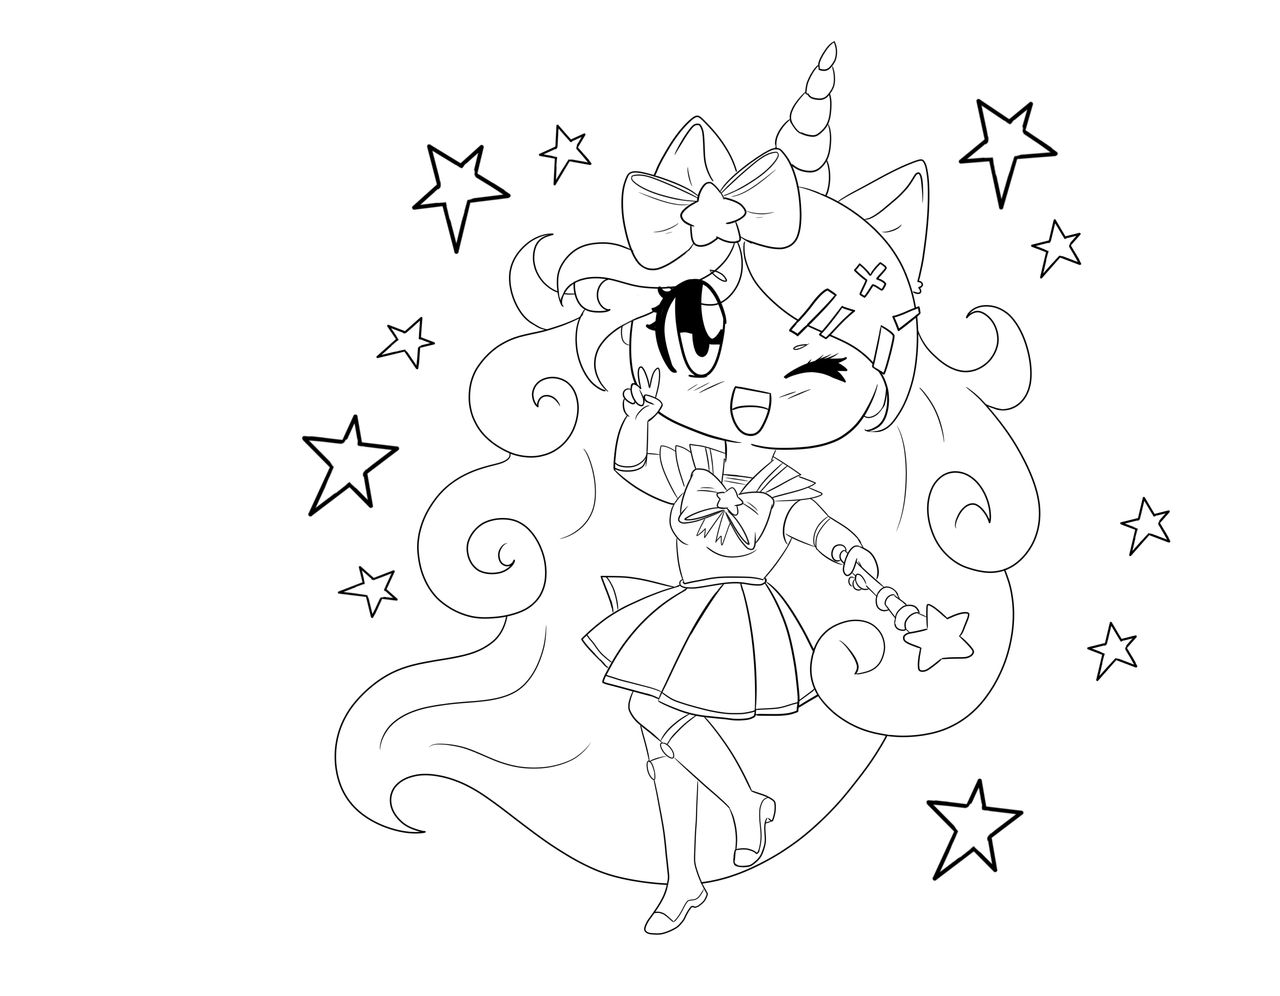 Free] Magical Girl Unicorn Coloring Page by JacqeyDraws on DeviantArt